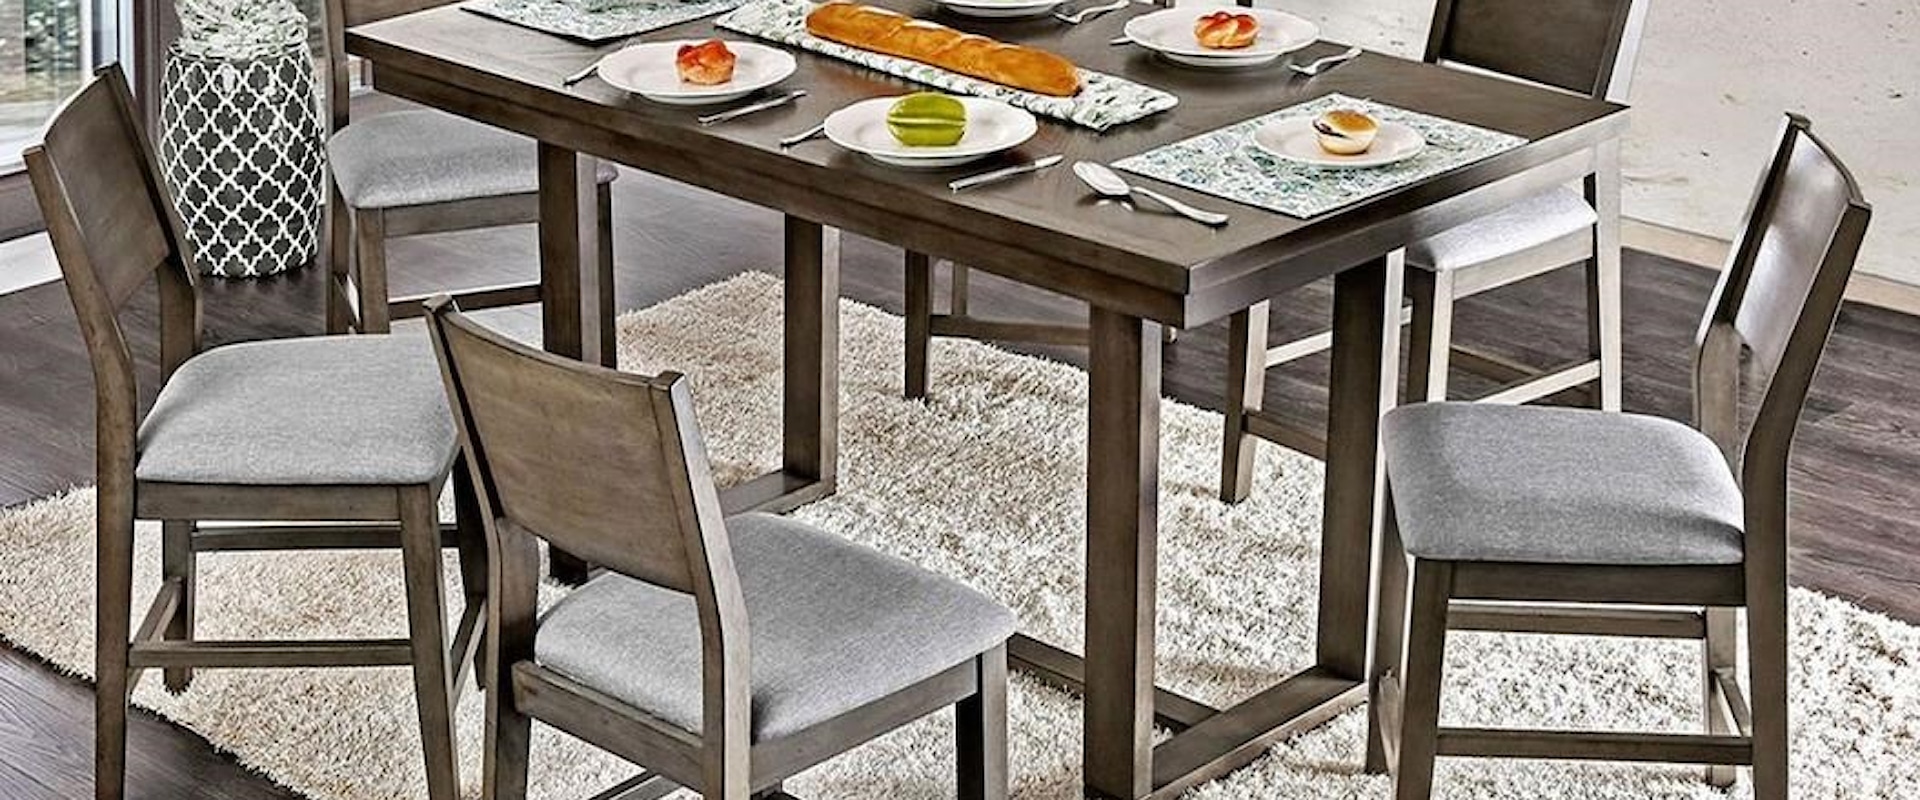 Contemporary 7 Pc Counter Height Dining Set